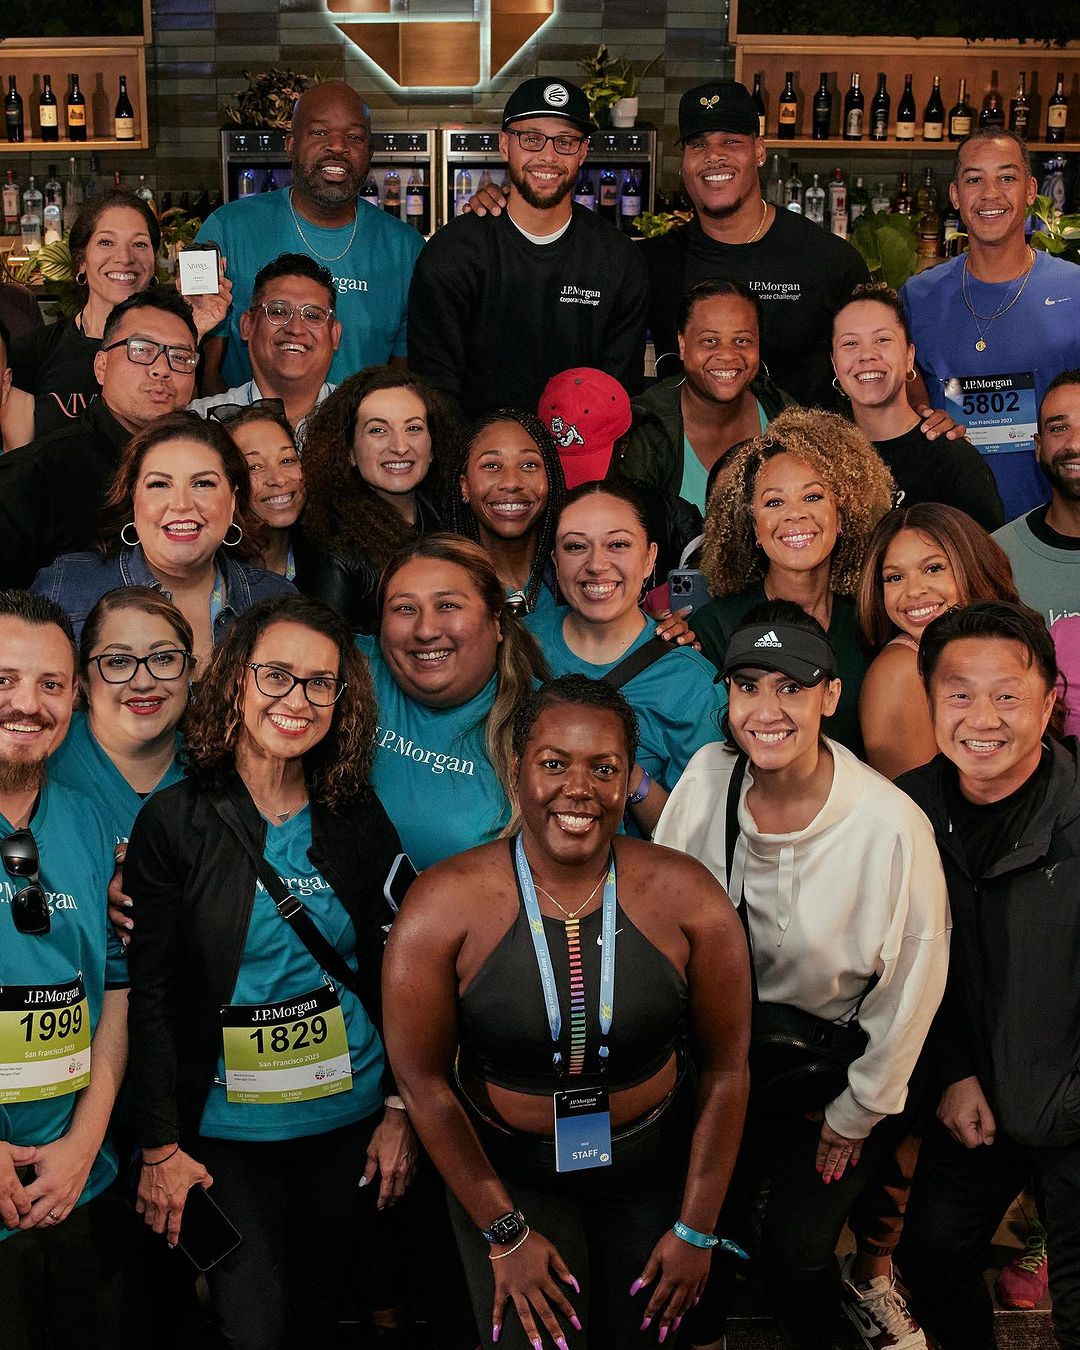 Stephen Curry in Year 37 in San Francisco of the @jpmorgan Corporate Challenge